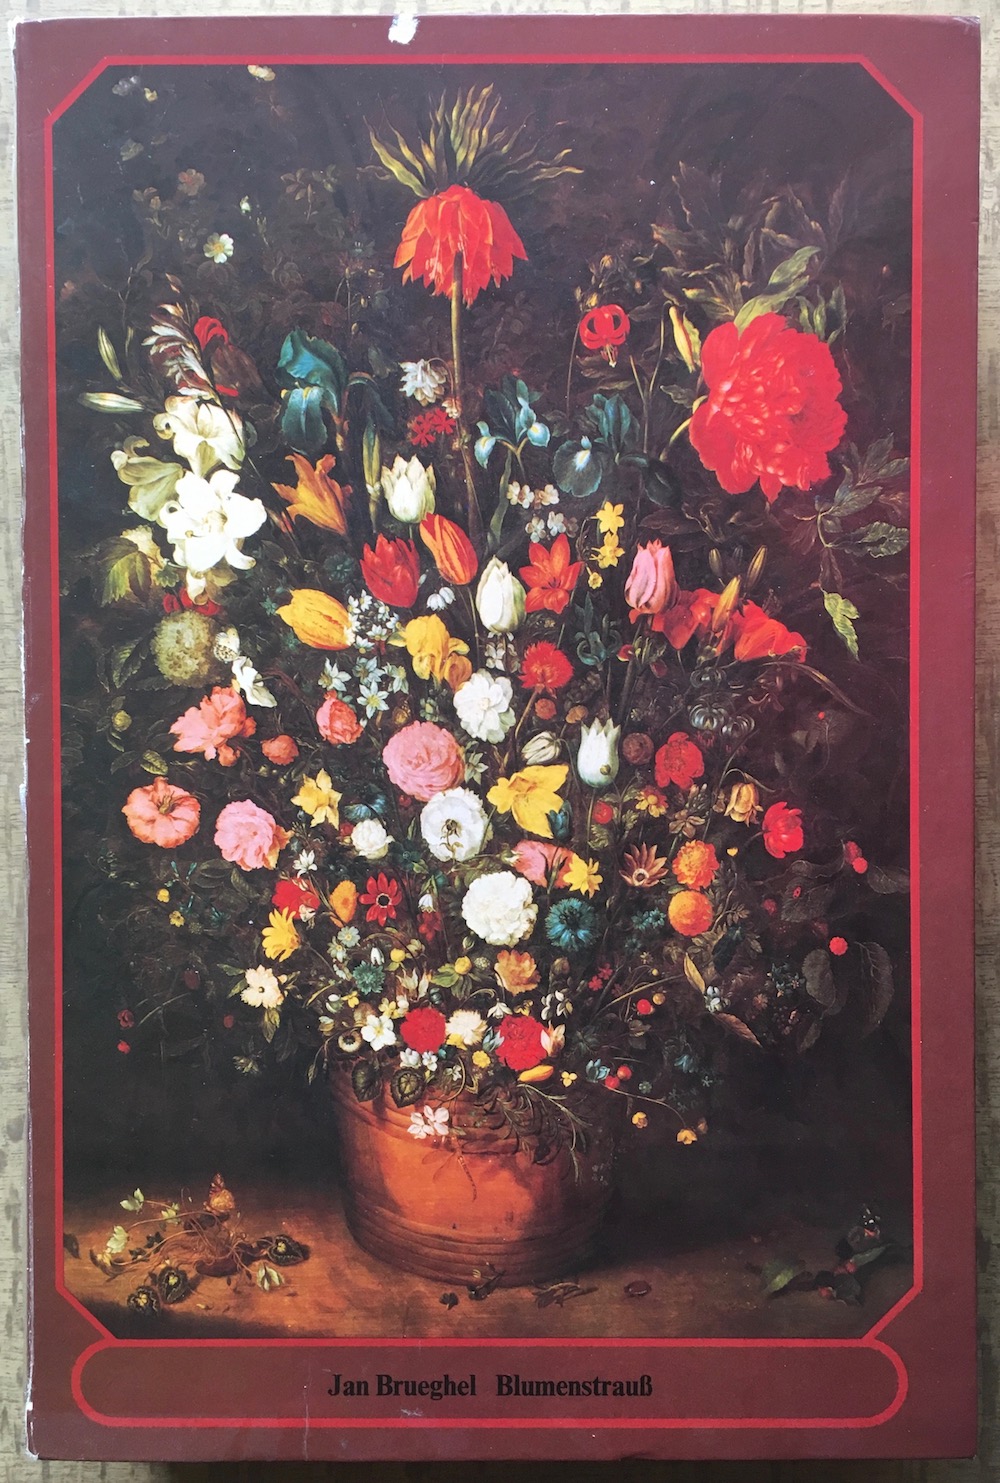 Image of the 1500, F.X. Schmid, Bouquet, Jan Brueghel the Elder, Picture of the Box